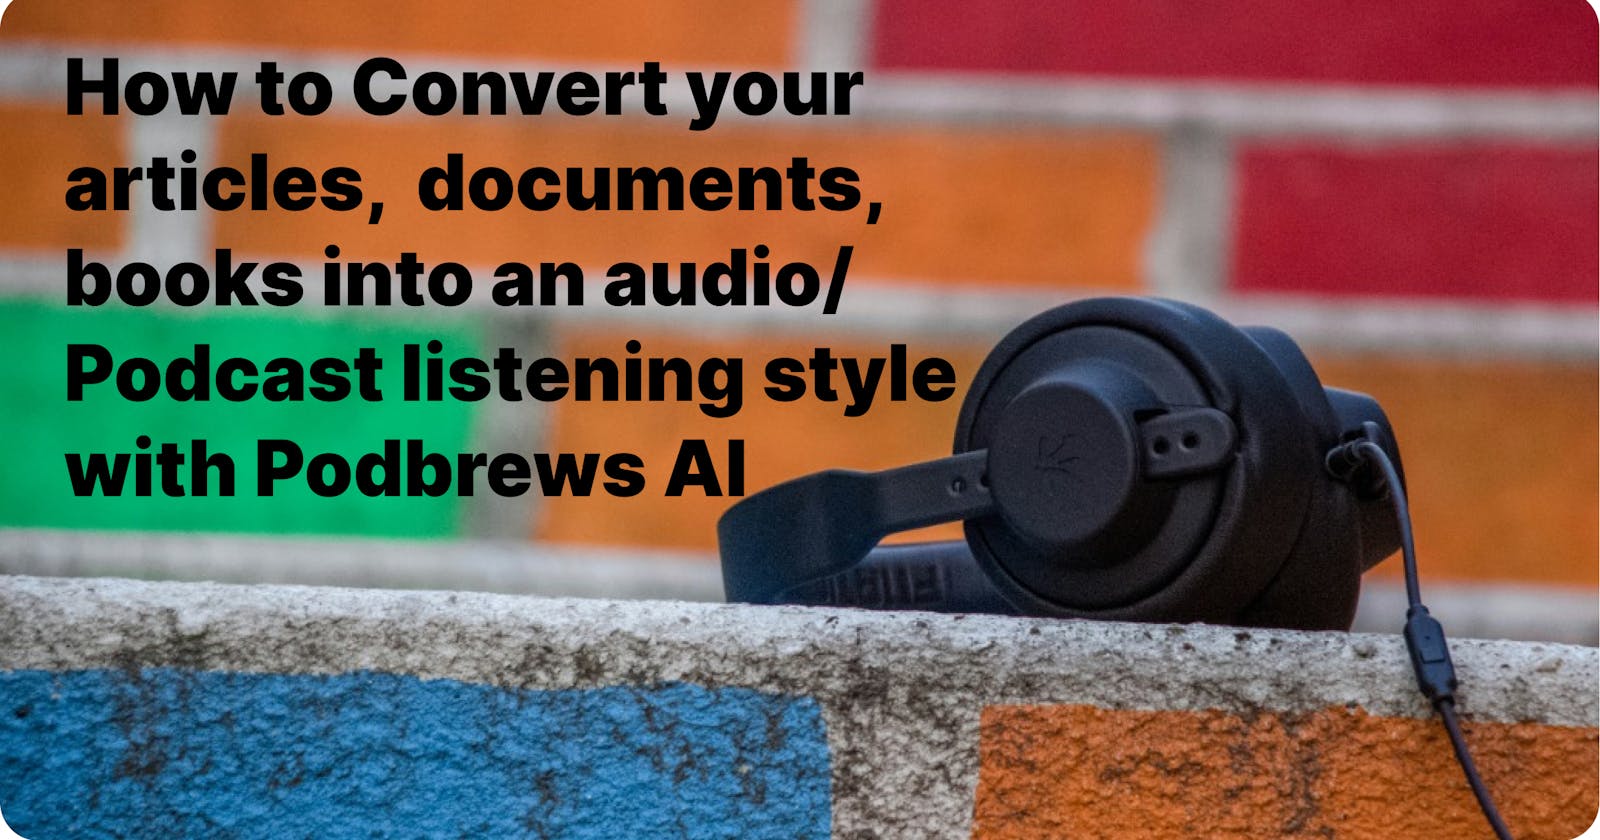 How Podbrews AI can Improve your Learning and  Daily Reading schedule.